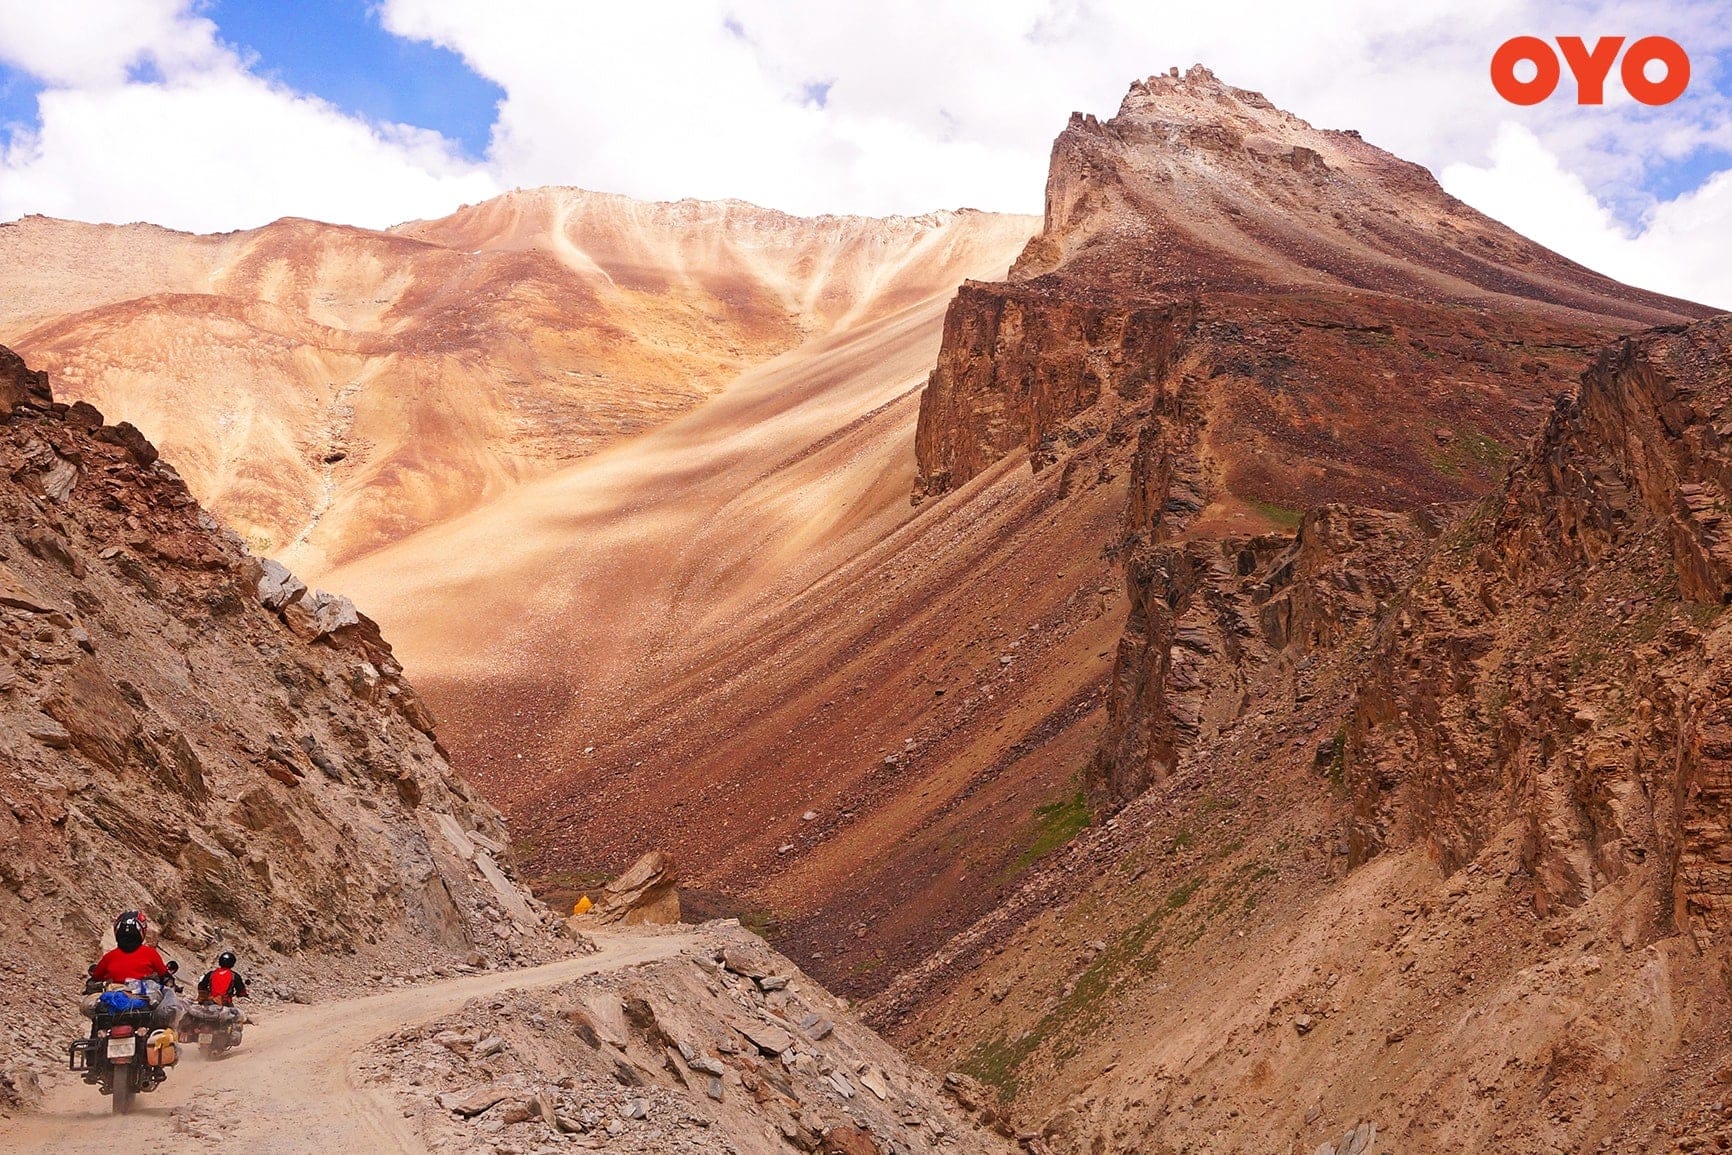 Manali to Leh - one of the best places to travel alone in India